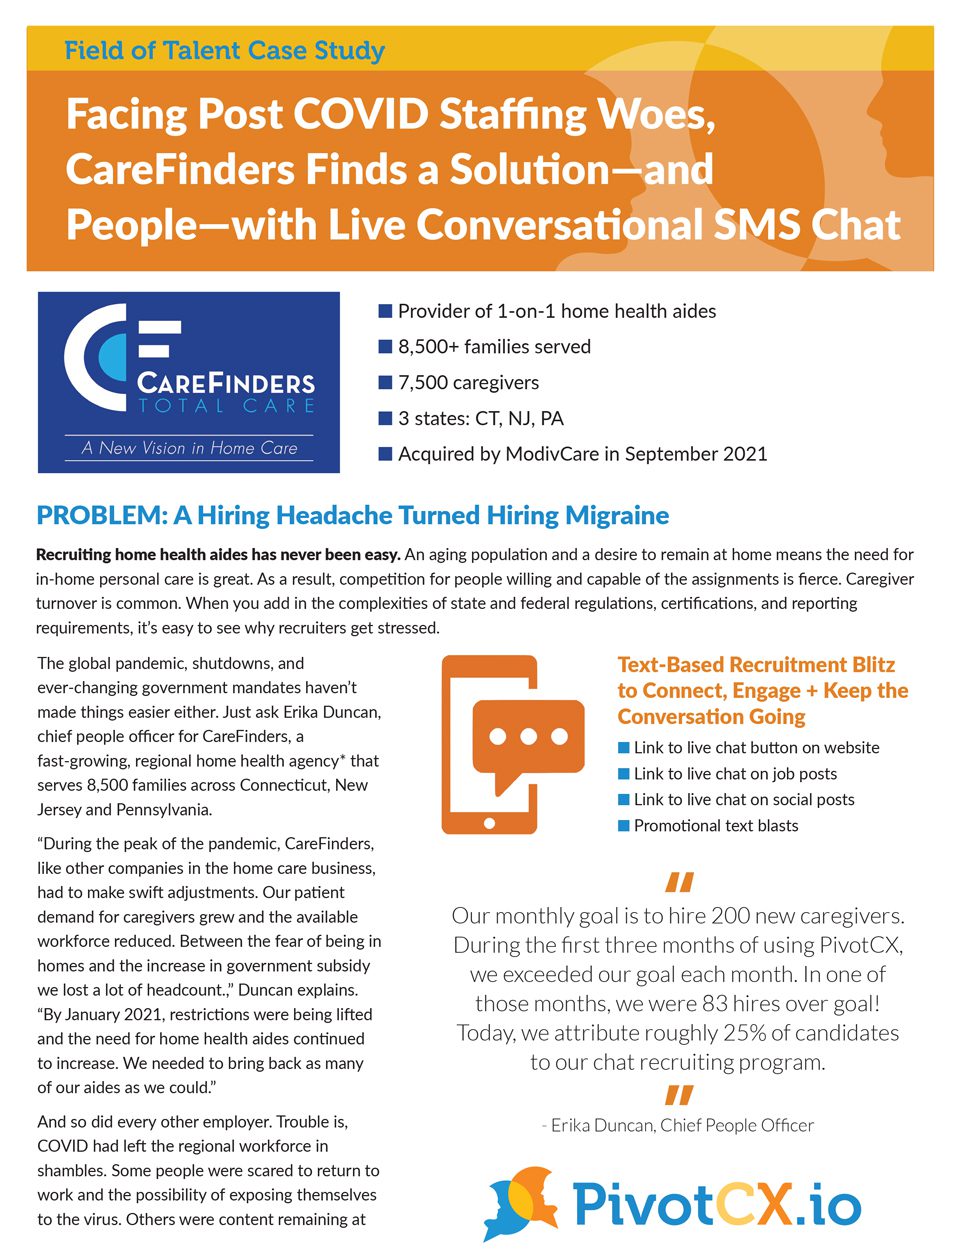 Facing Post COVID Staffing Woes, CareFinders Finds a Solution—and People—with Live Conversational SMS Chat